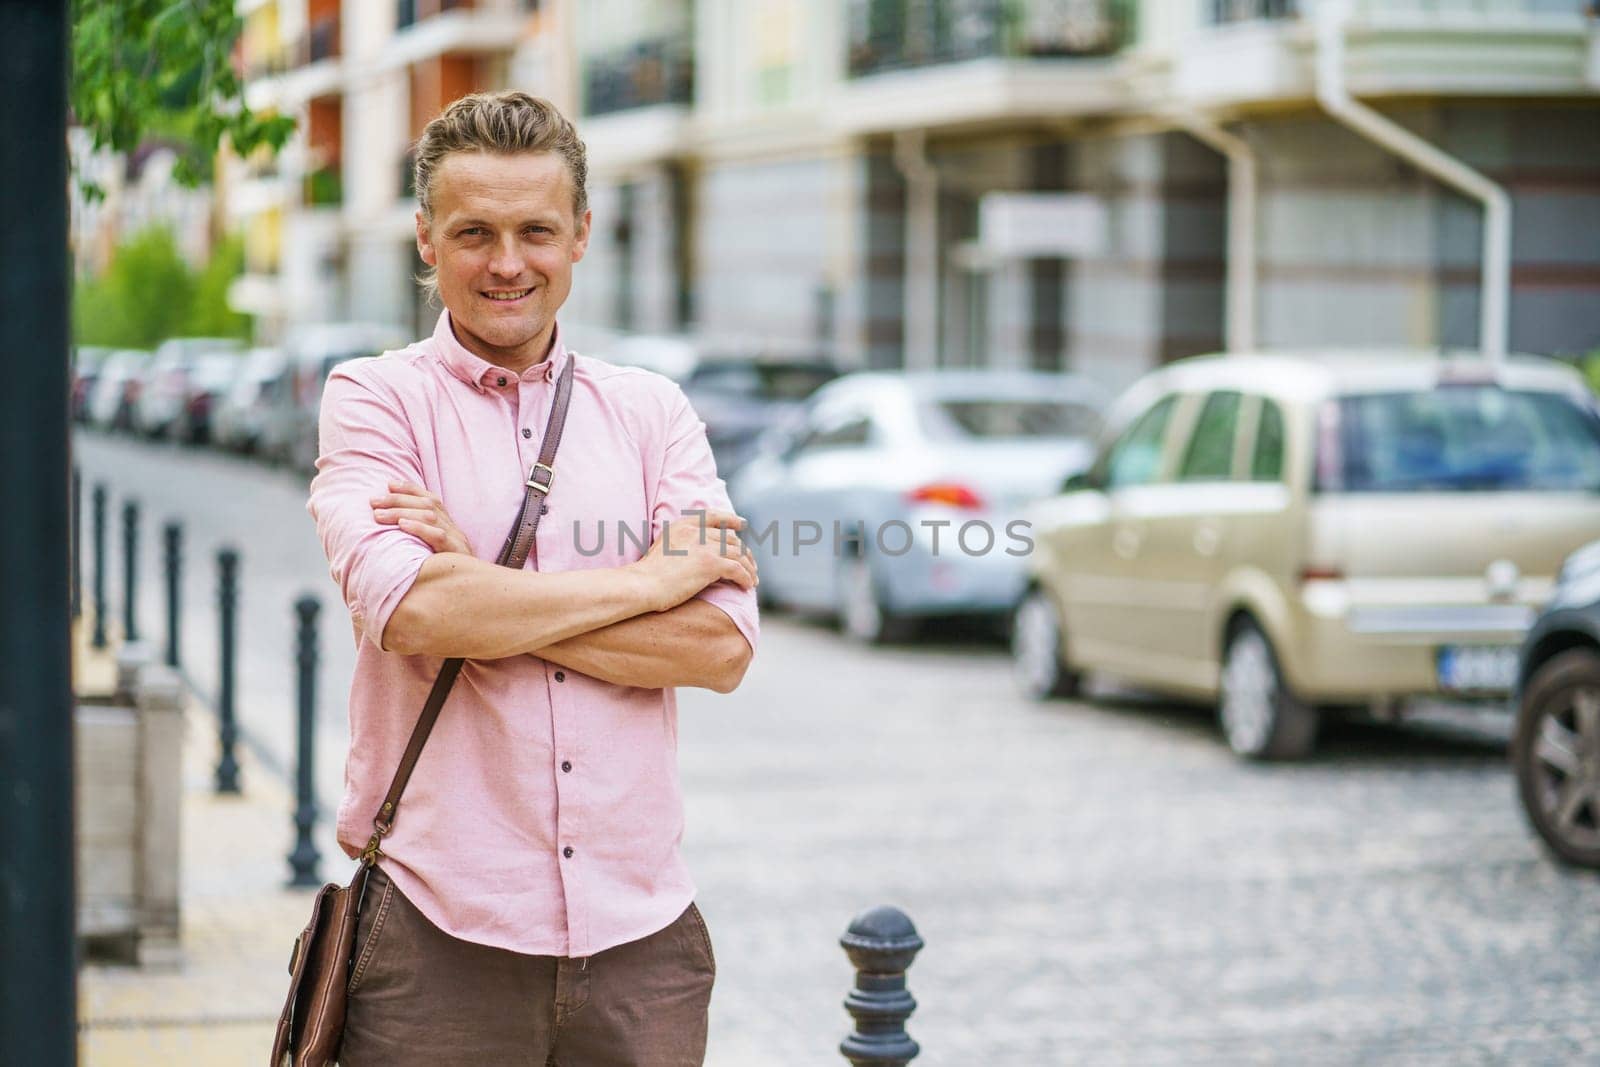 Blond, handsome Caucasian individual confidently standing on street in city of Europe, with crossed hands. Person's stylish appearance and confident stance add to their overall charm. . High quality photo